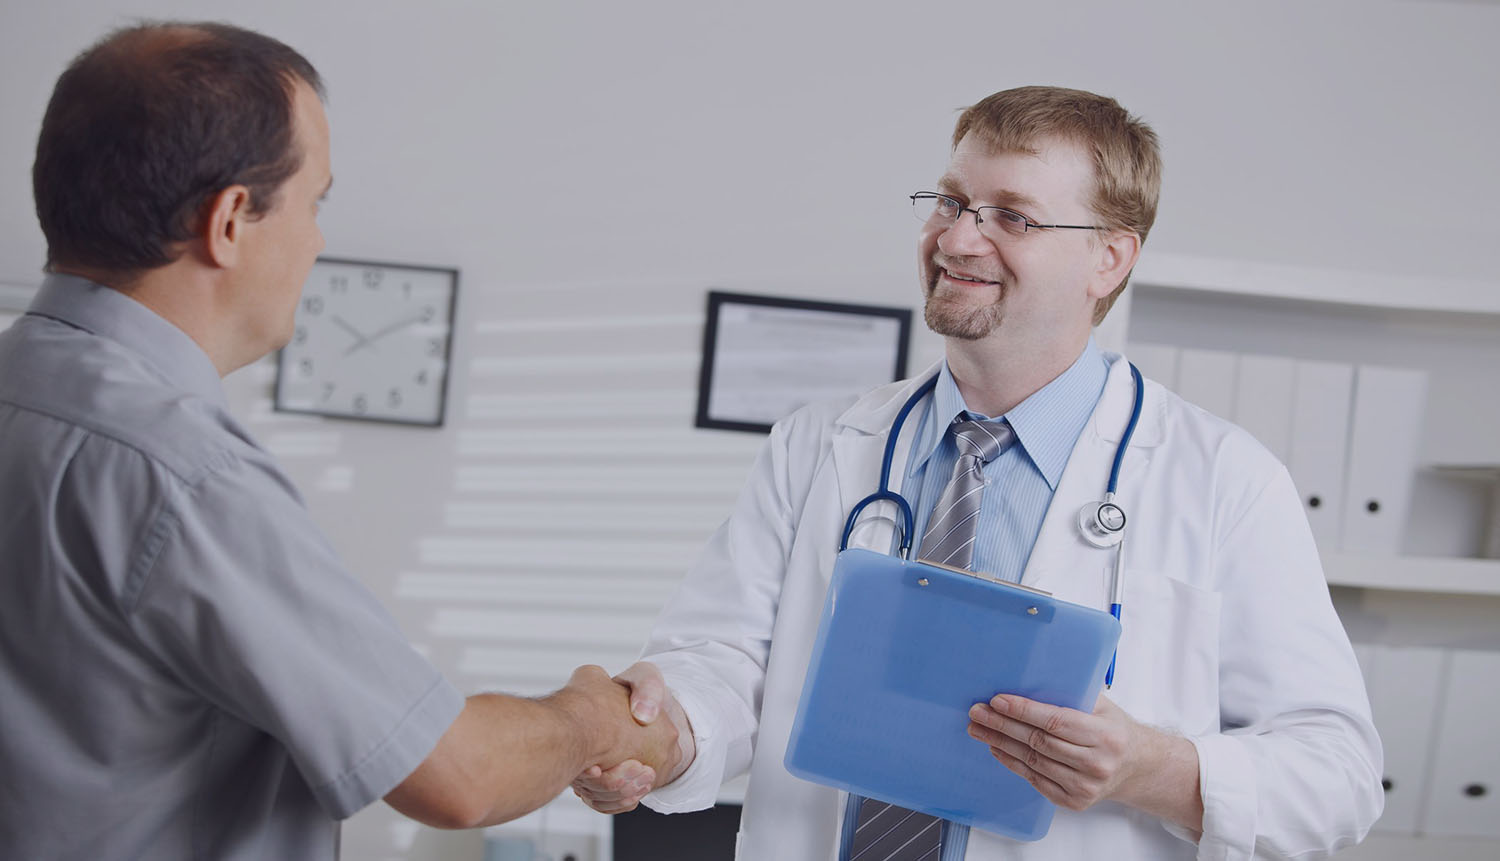 How to Advocate for Yourself in a Doctors Appointment